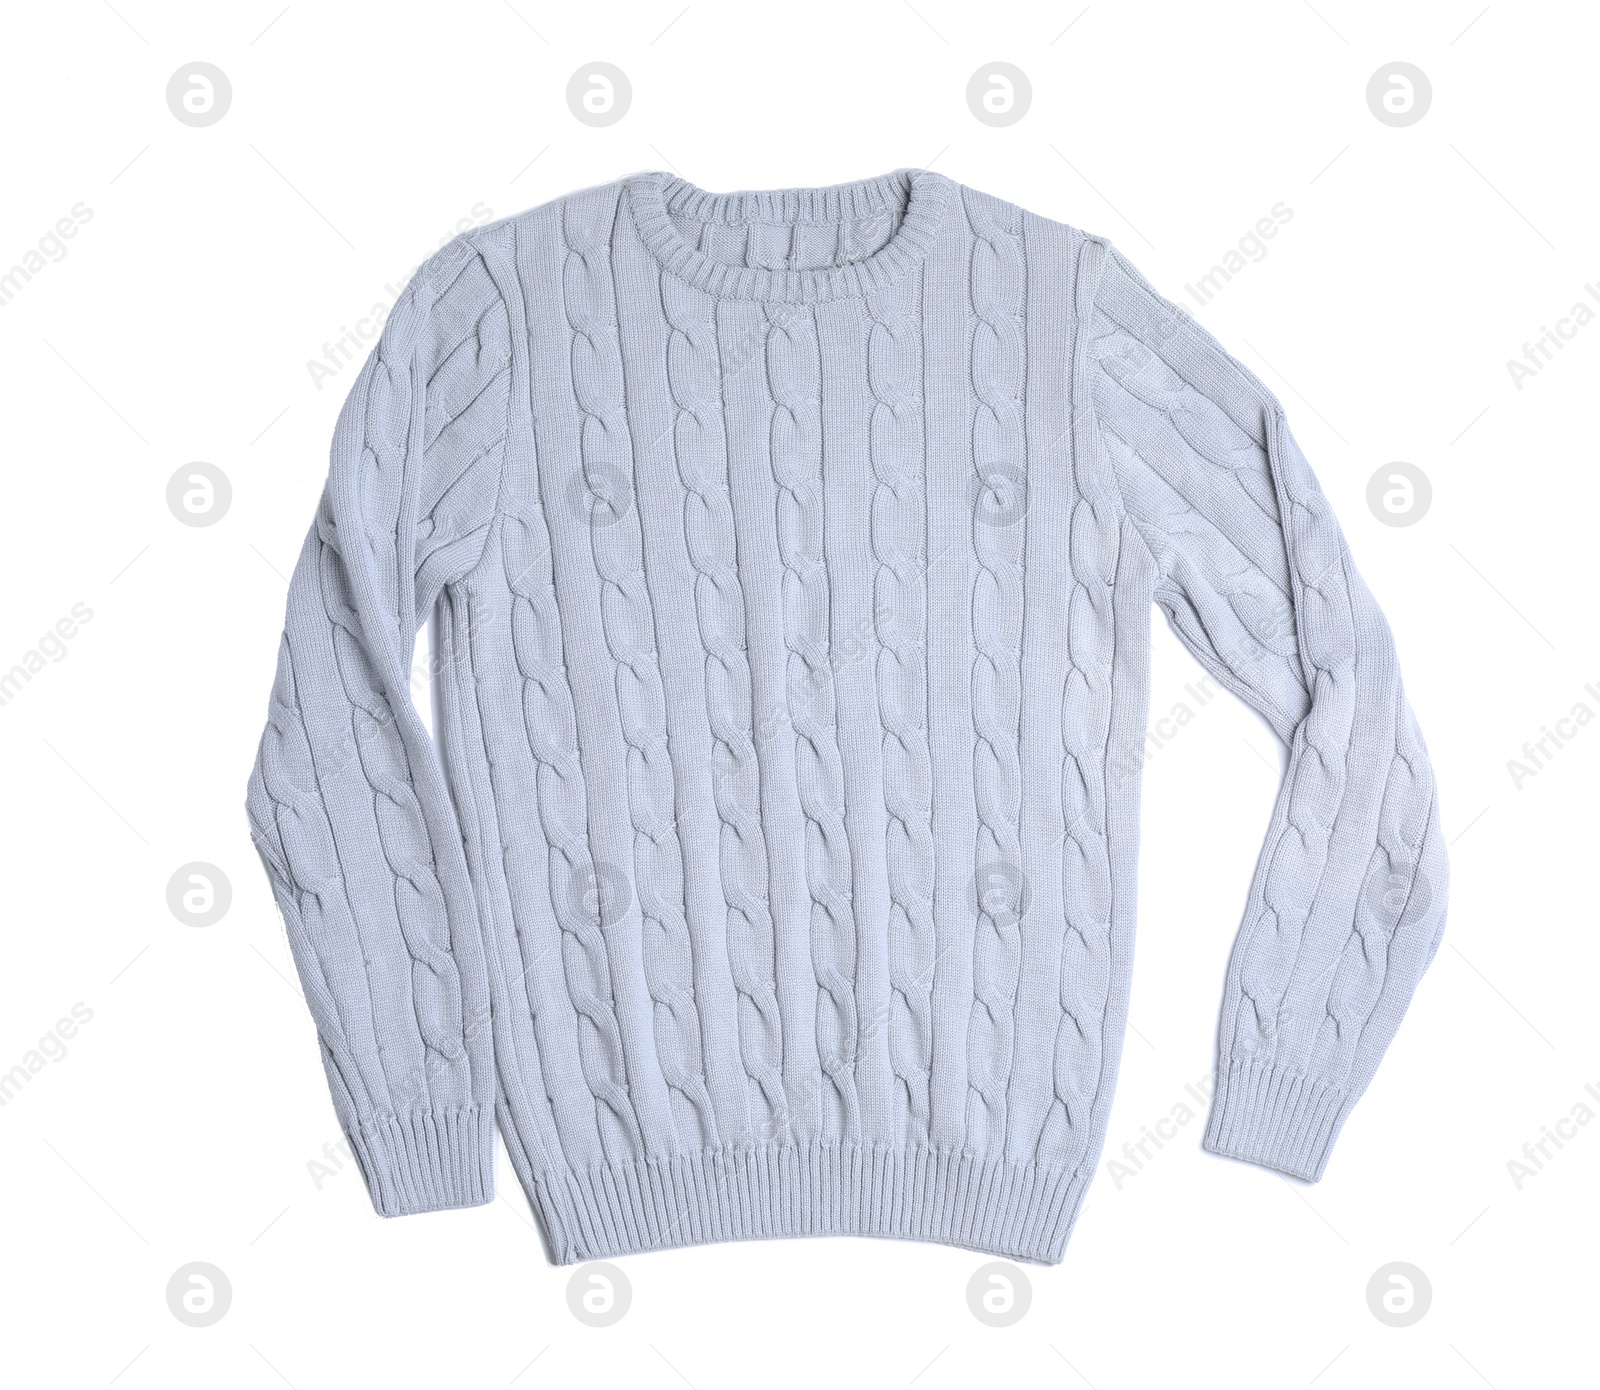 Photo of Light knitted sweater on white background, top view